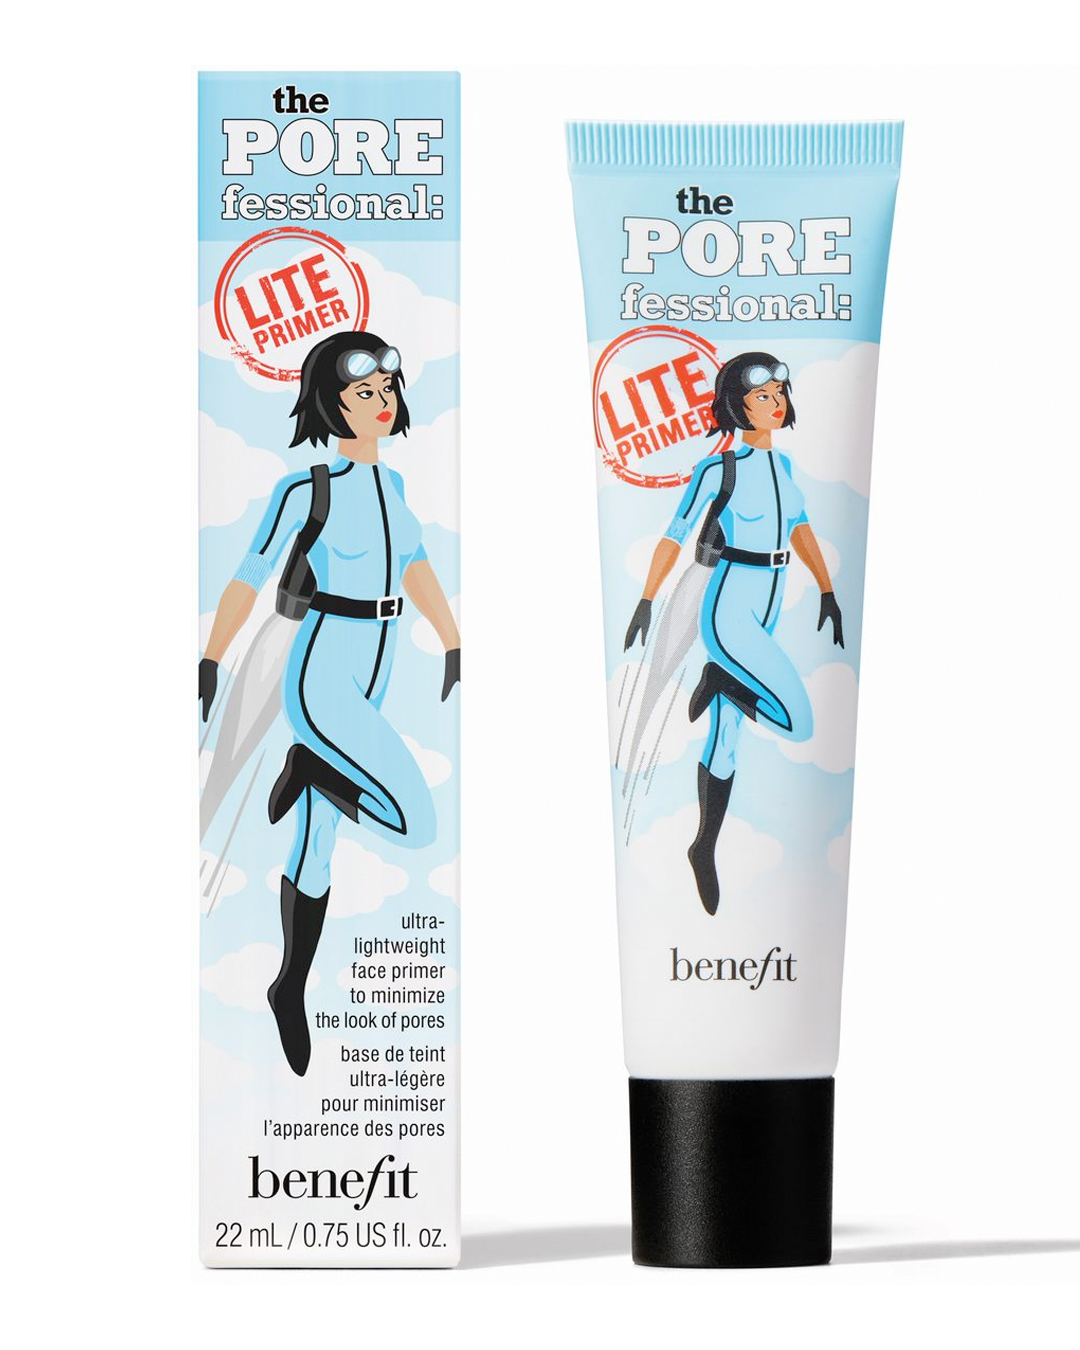 porefessional lite primer with packaging